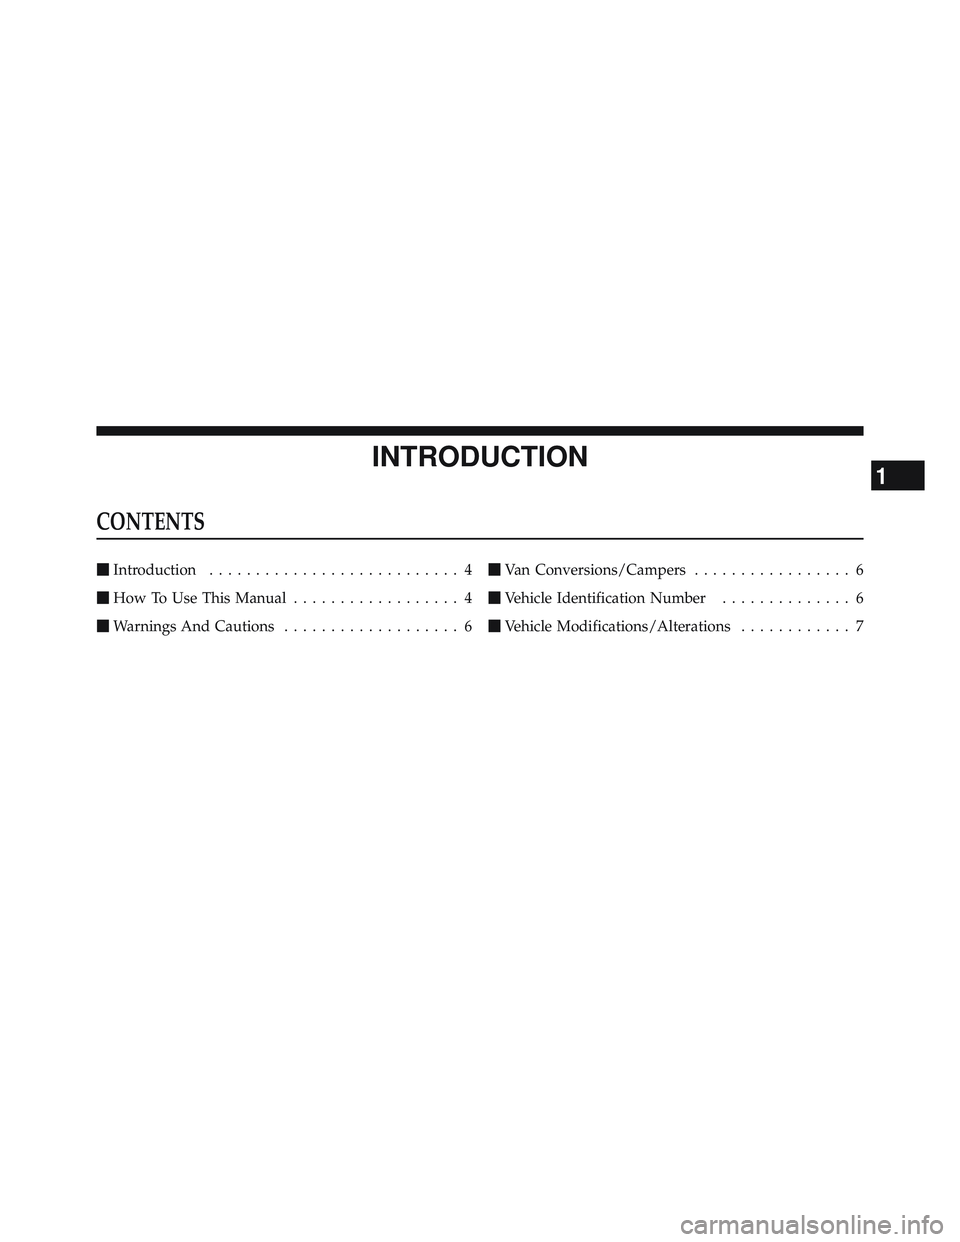 RAM CHASSIS CAB 2012  Owners Manual INTRODUCTIONCONTENTS  Introduction ........................... 4
 How To Use This Manual .................. 4
 Warnings And Cautions ................... 6  Van Conversions/Campers ................